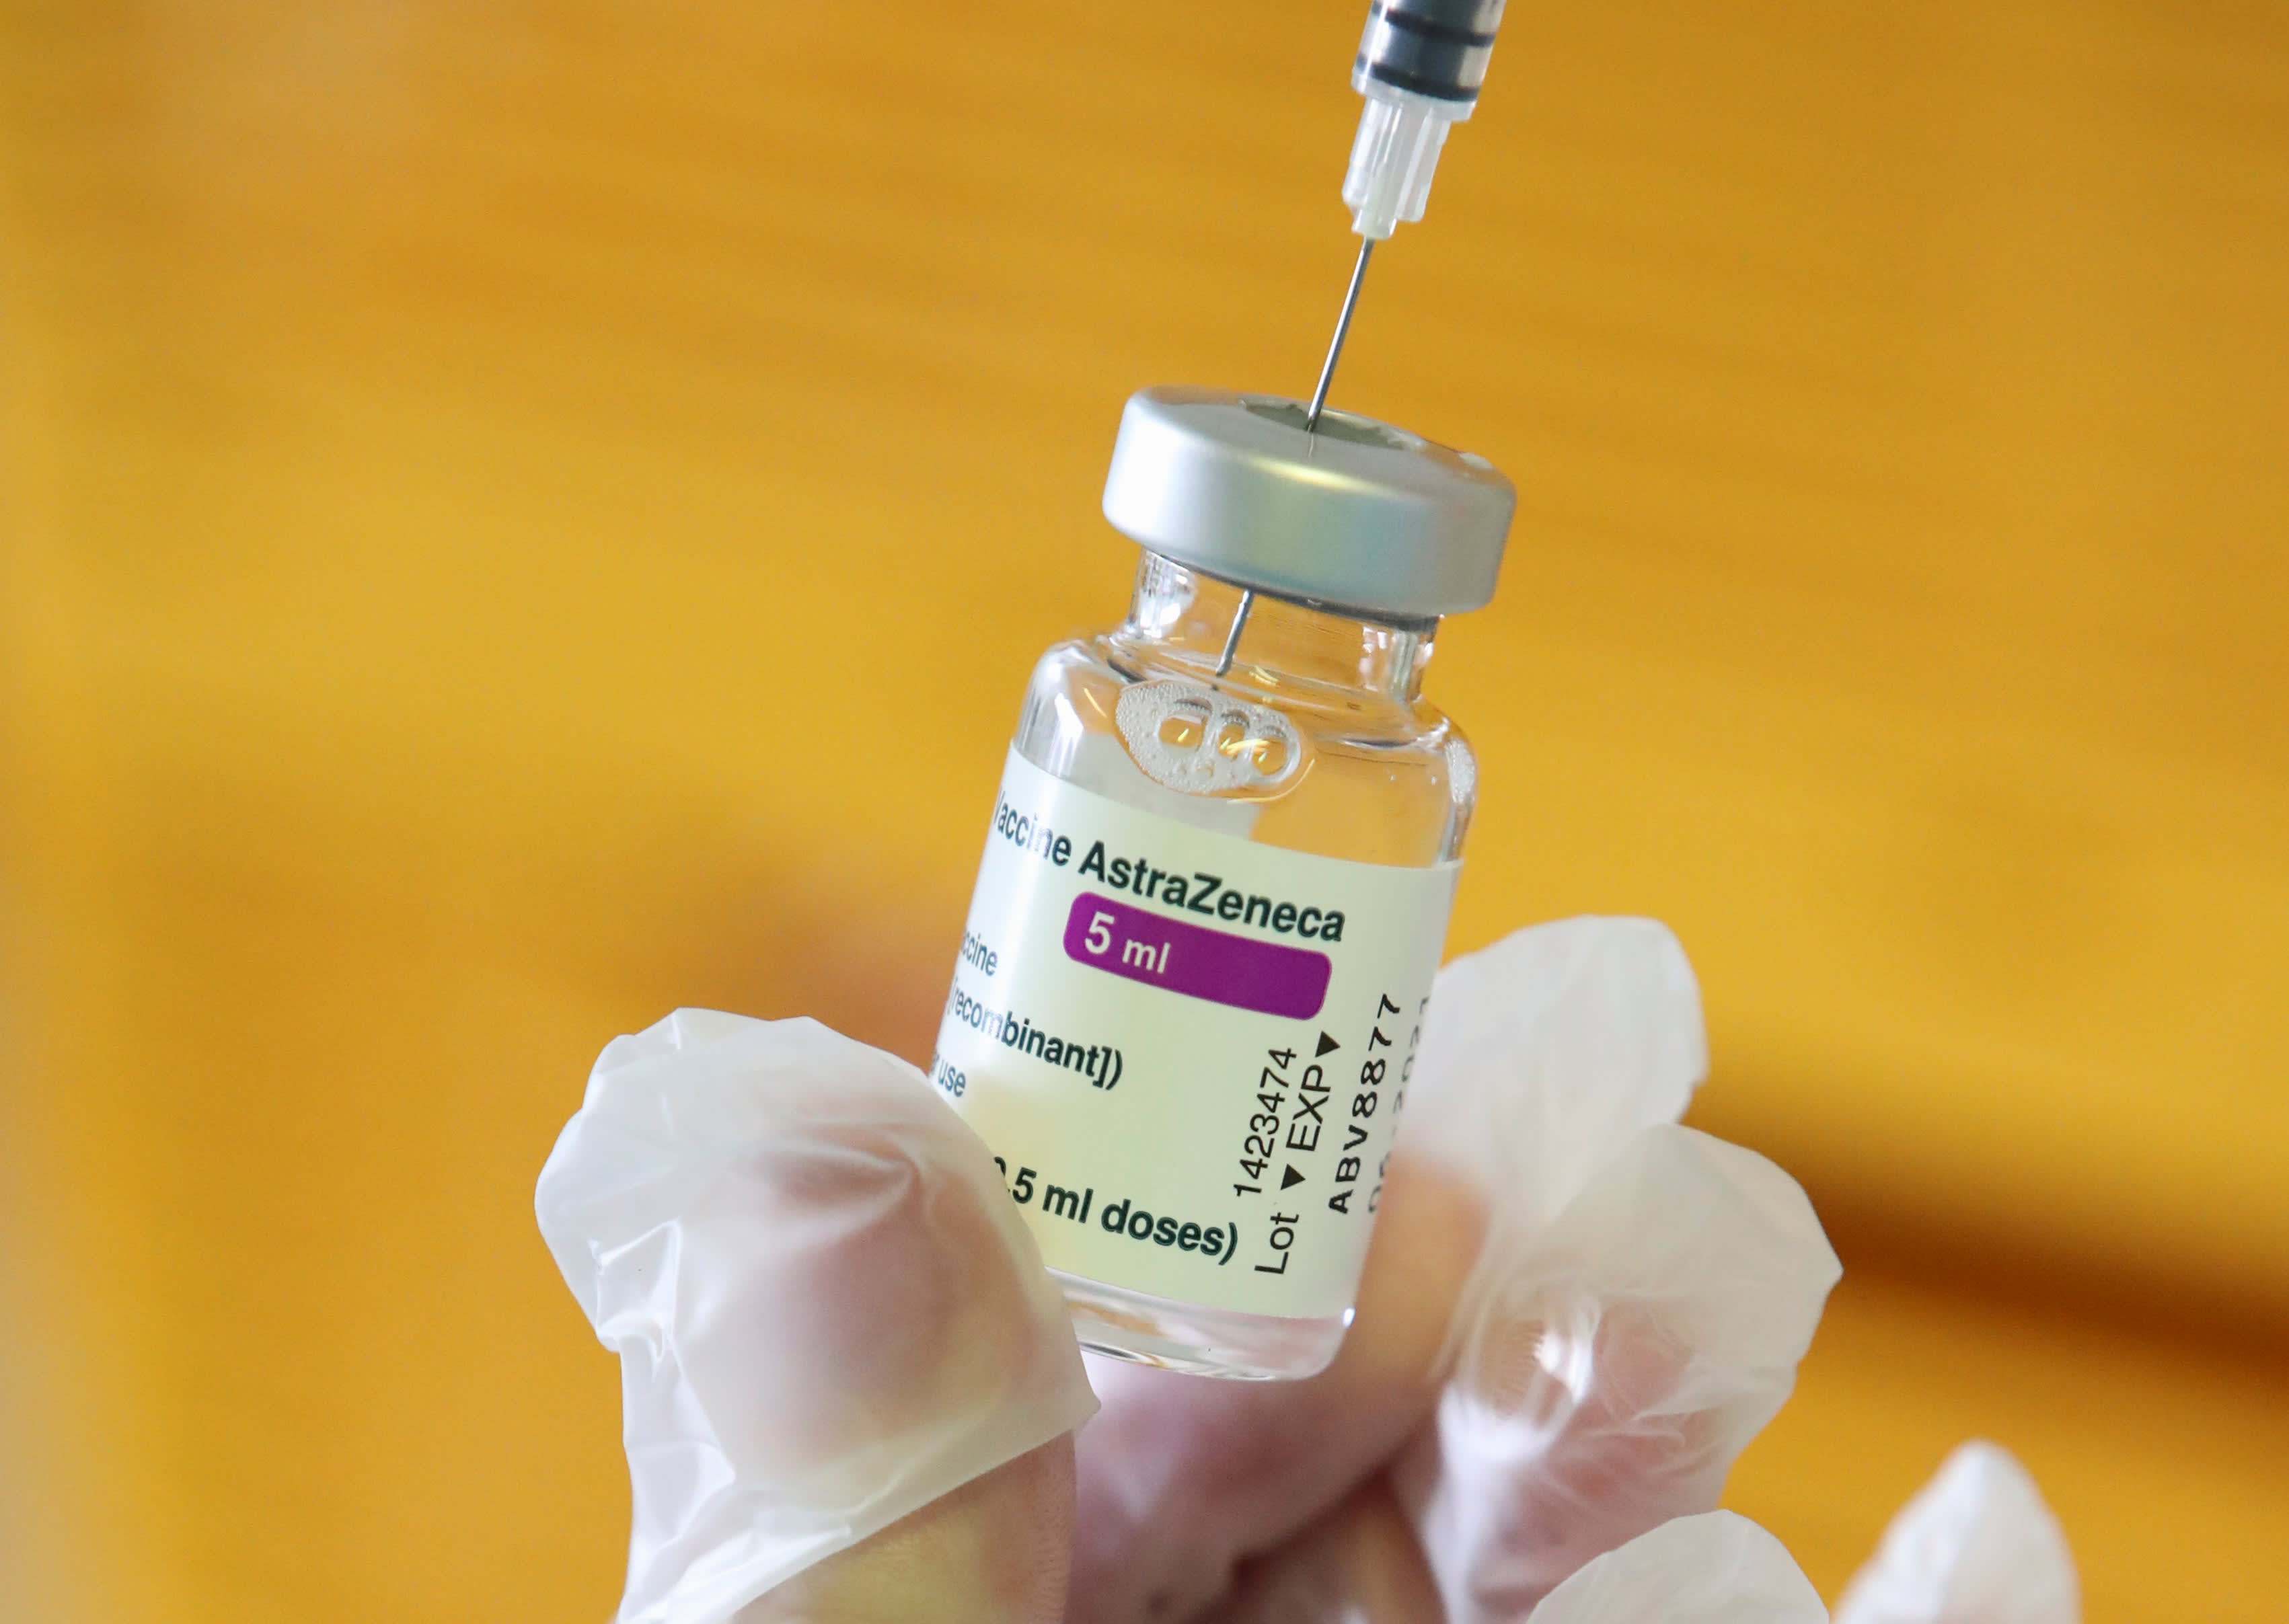 The EU is preparing legal action against AstraZeneca over the issue of vaccine delivery